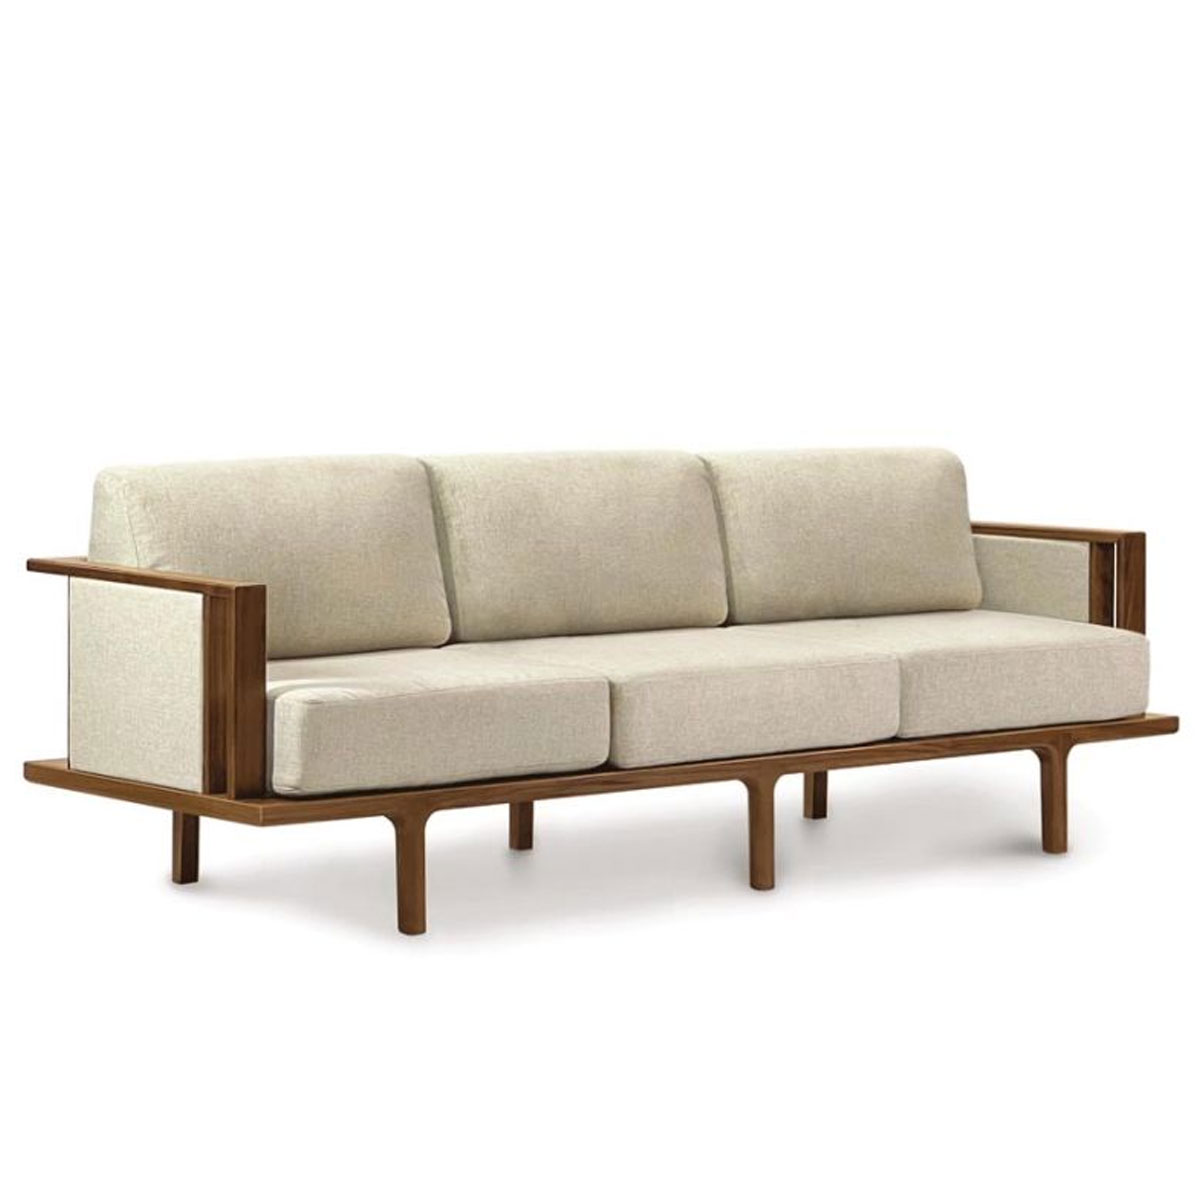 Copeland Sierra Sofa with Upholstered Panels in Walnut